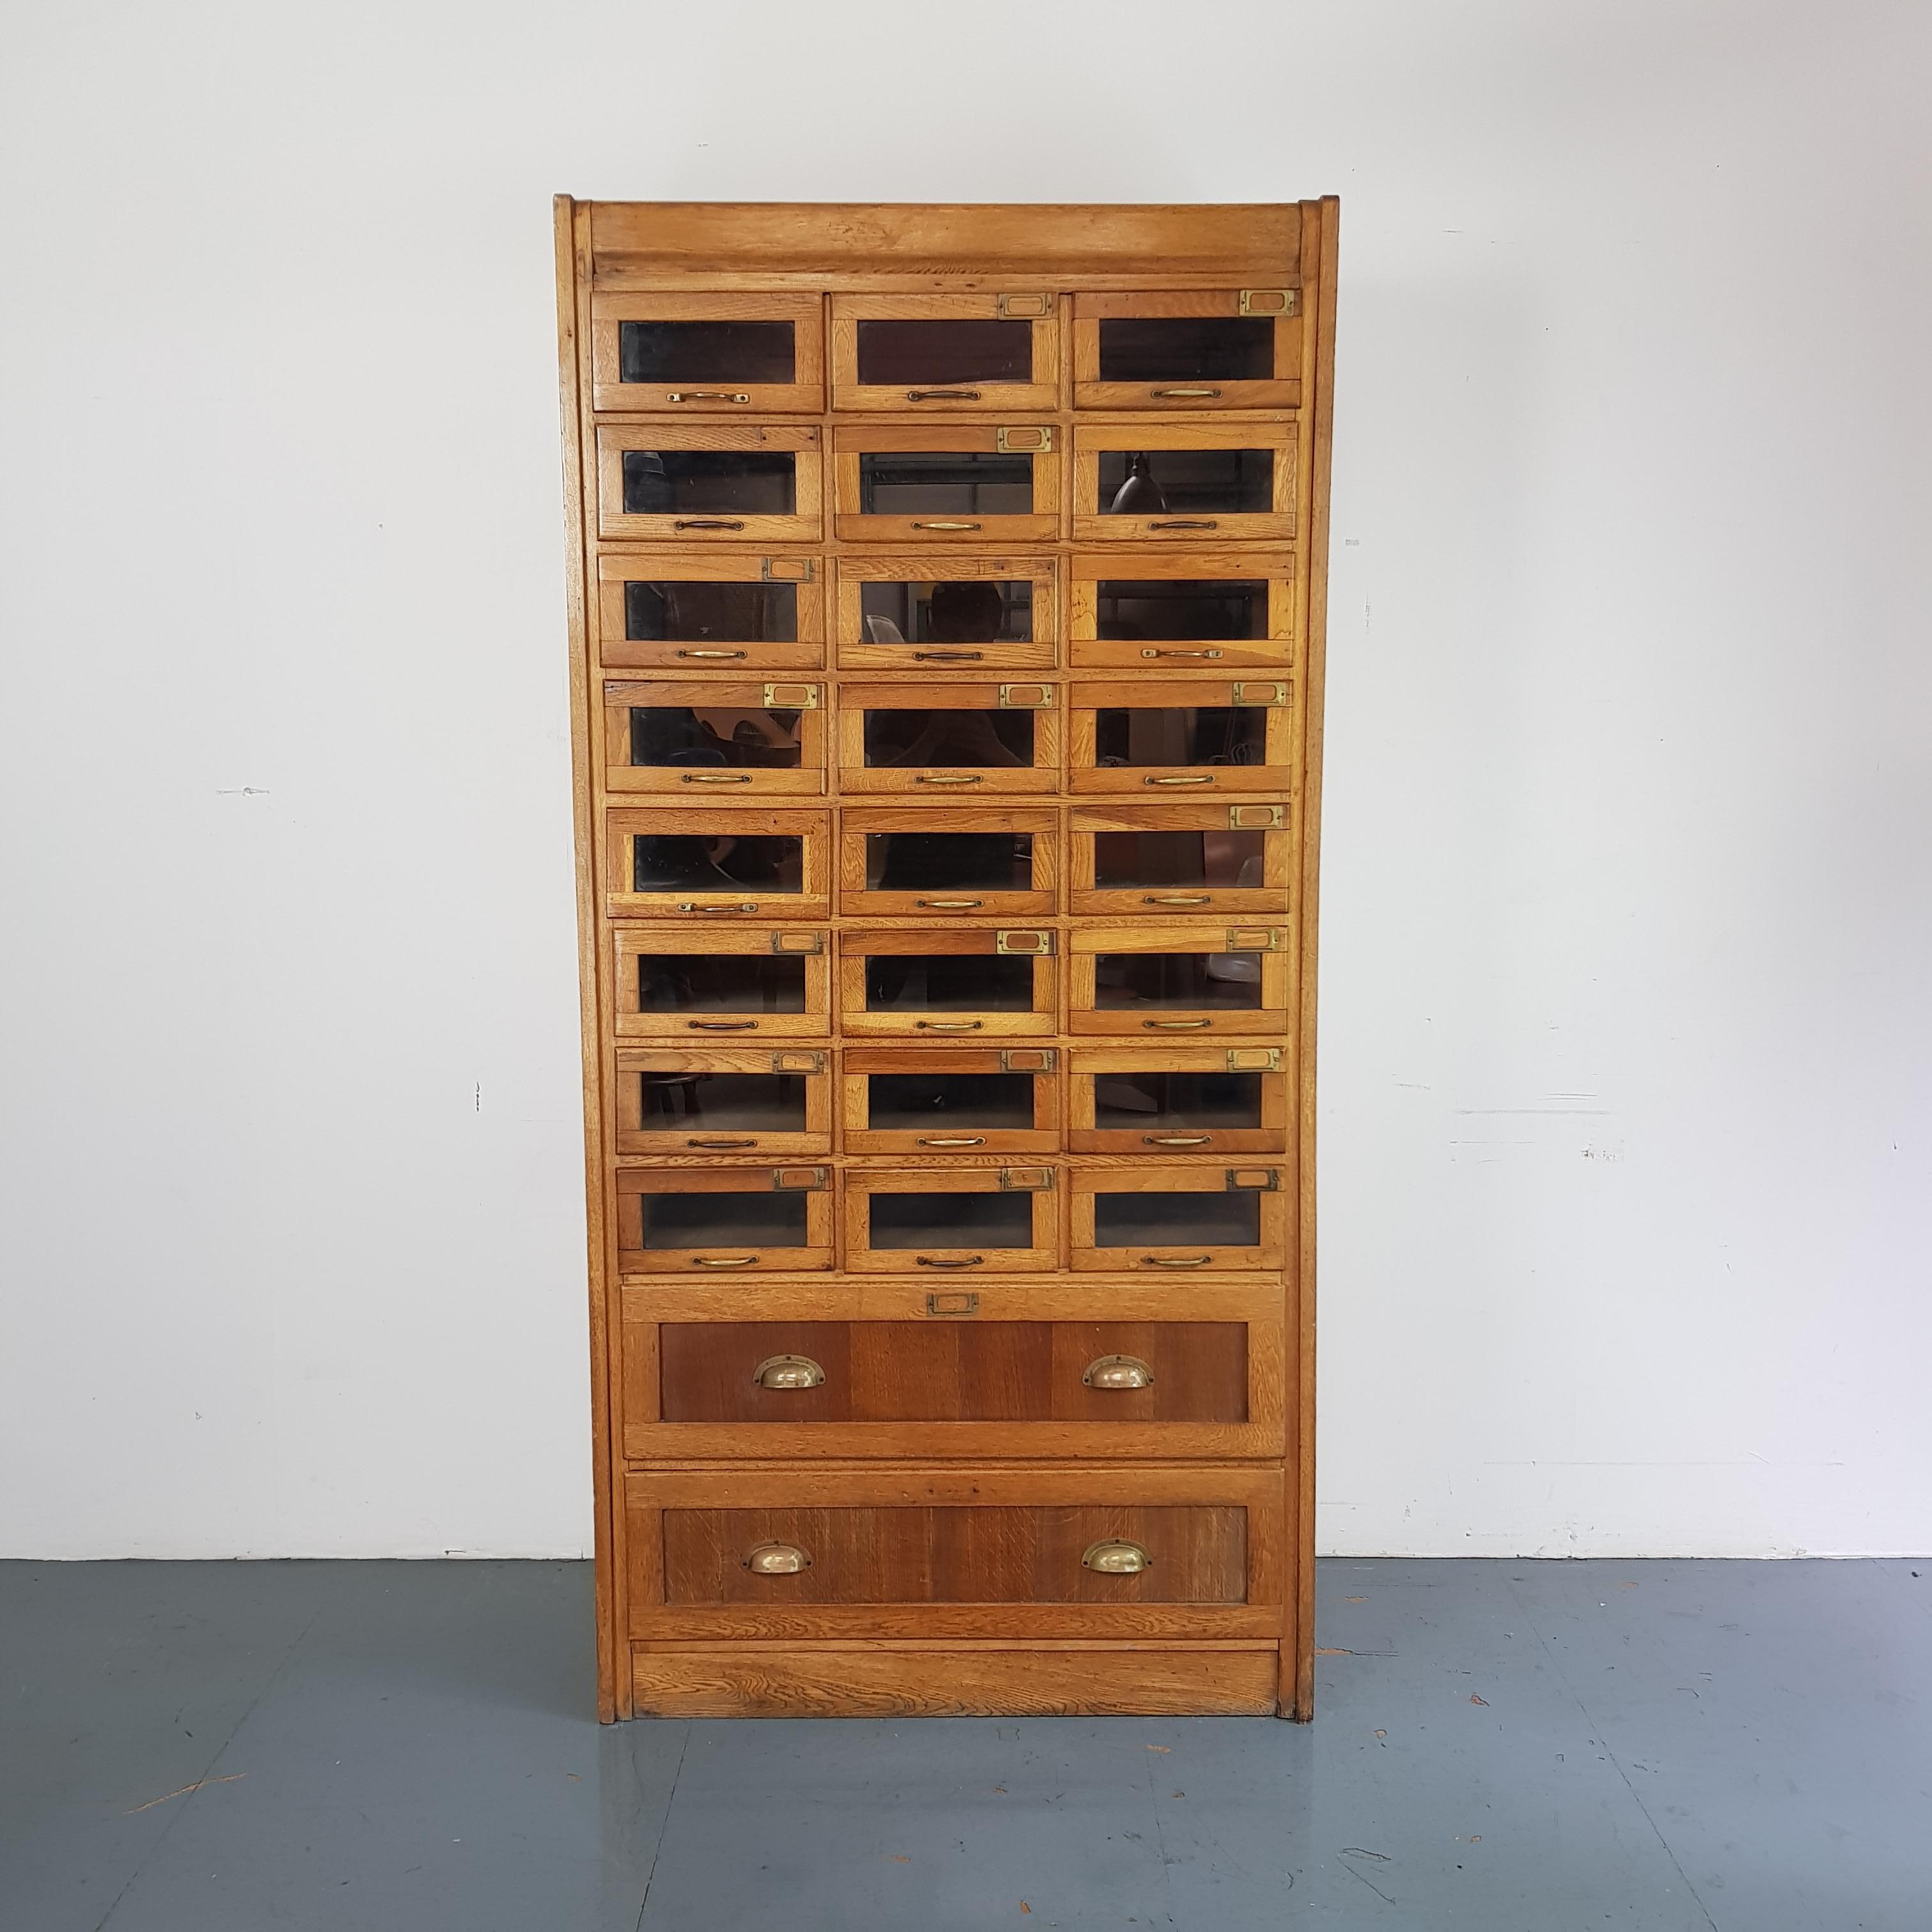 Lovely vintage haberdashery shop cabinet. 

This would add instant impact in a reception room, bedroom or hall. 

It has 24 small glass fronted drawers and two solid drawers, all with original metal handles. 

Dimensions:

Width